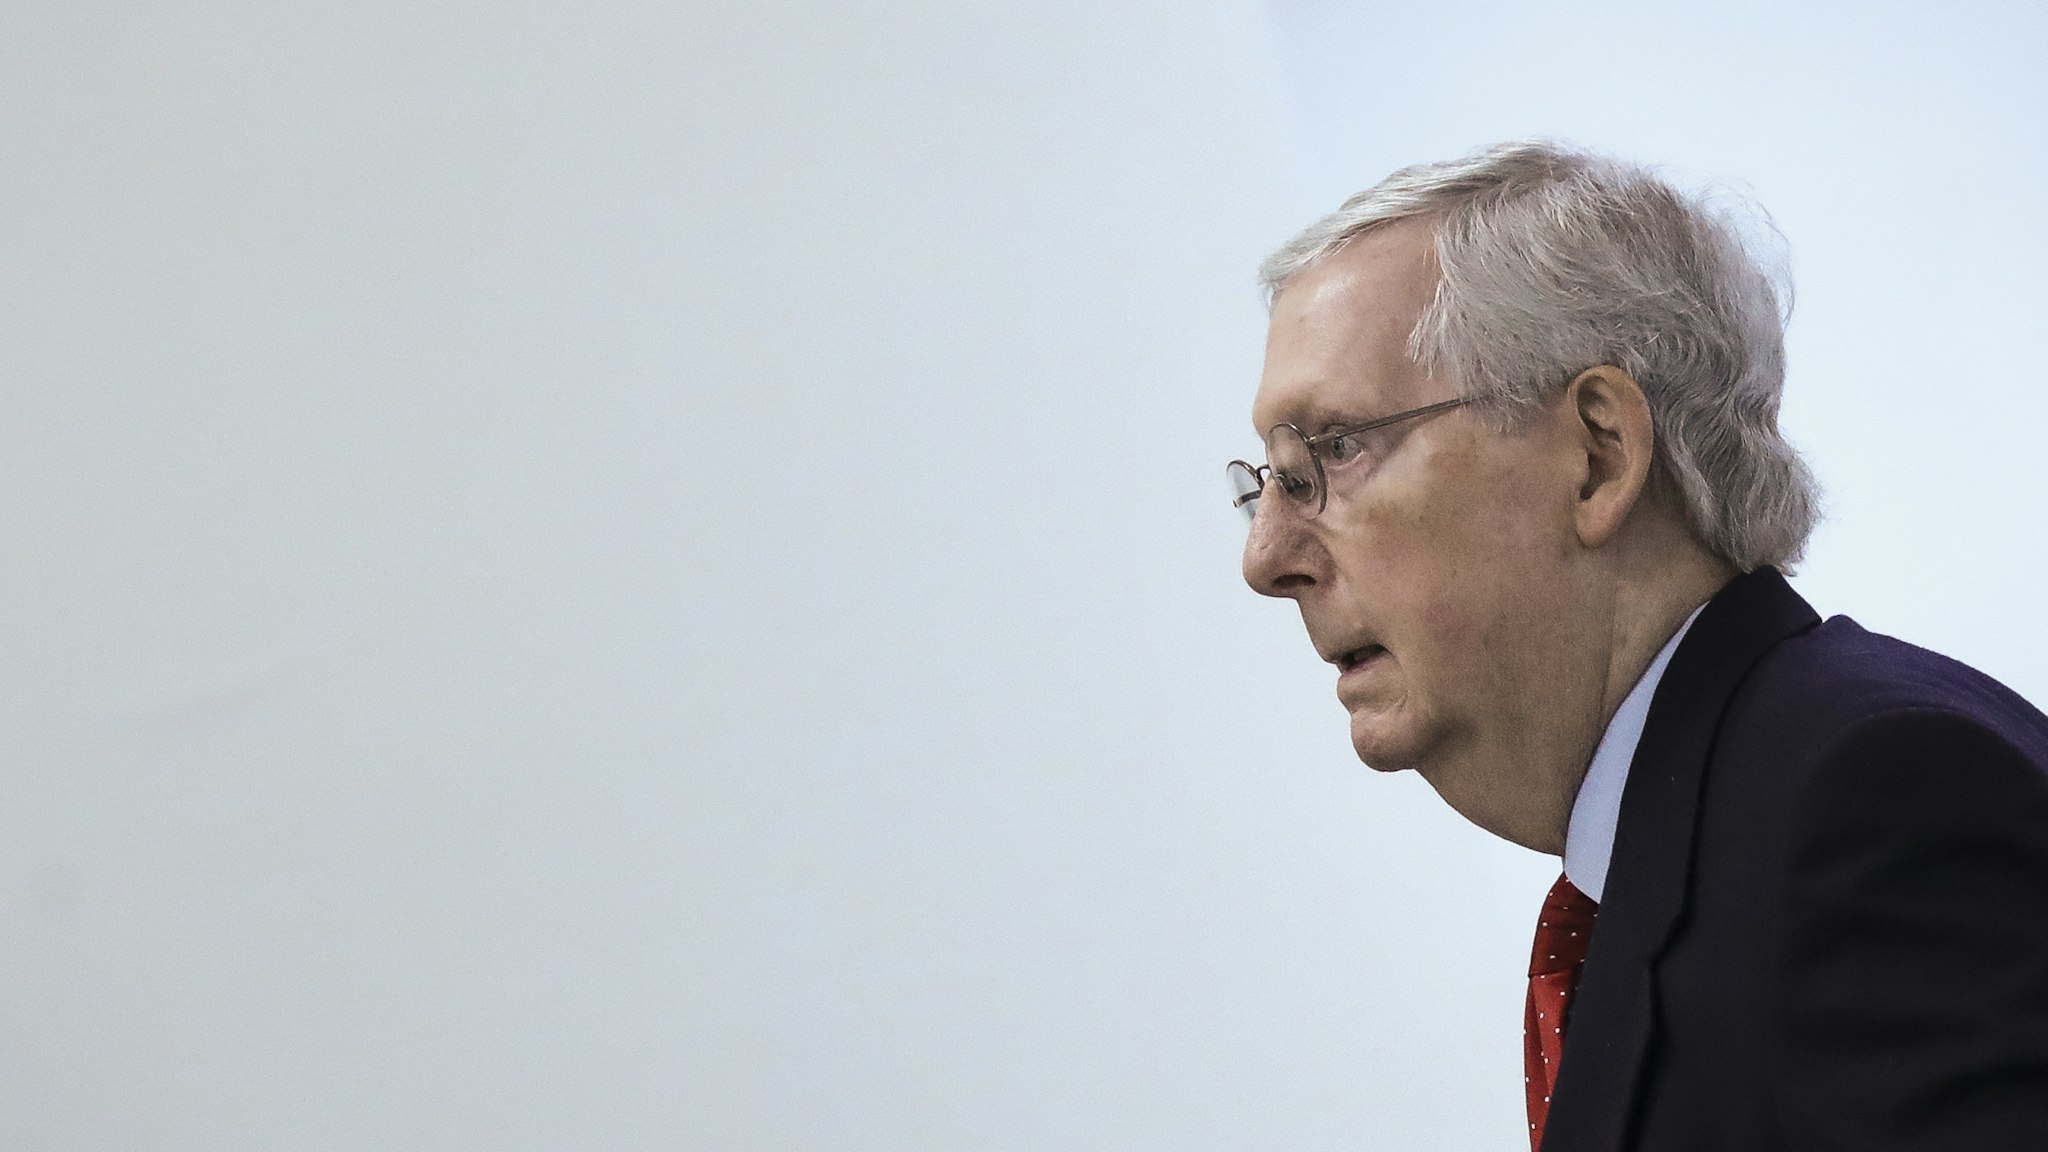 WASHINGTON, DC JANUARY 6: Senate Majority Leader Mitch McConnell (R-KY) exits after meeting with Secretary of State Mike Pompeo at the Sensitive Compartmented Information Facility (SCIF) at the U.S. Capitol January 6, 2020 in Washington, DC. Pompeo was reportedly at the Capitol to brief a small group of Senators about the situation in Iran. (Photo by Drew Angerer/Getty Images)